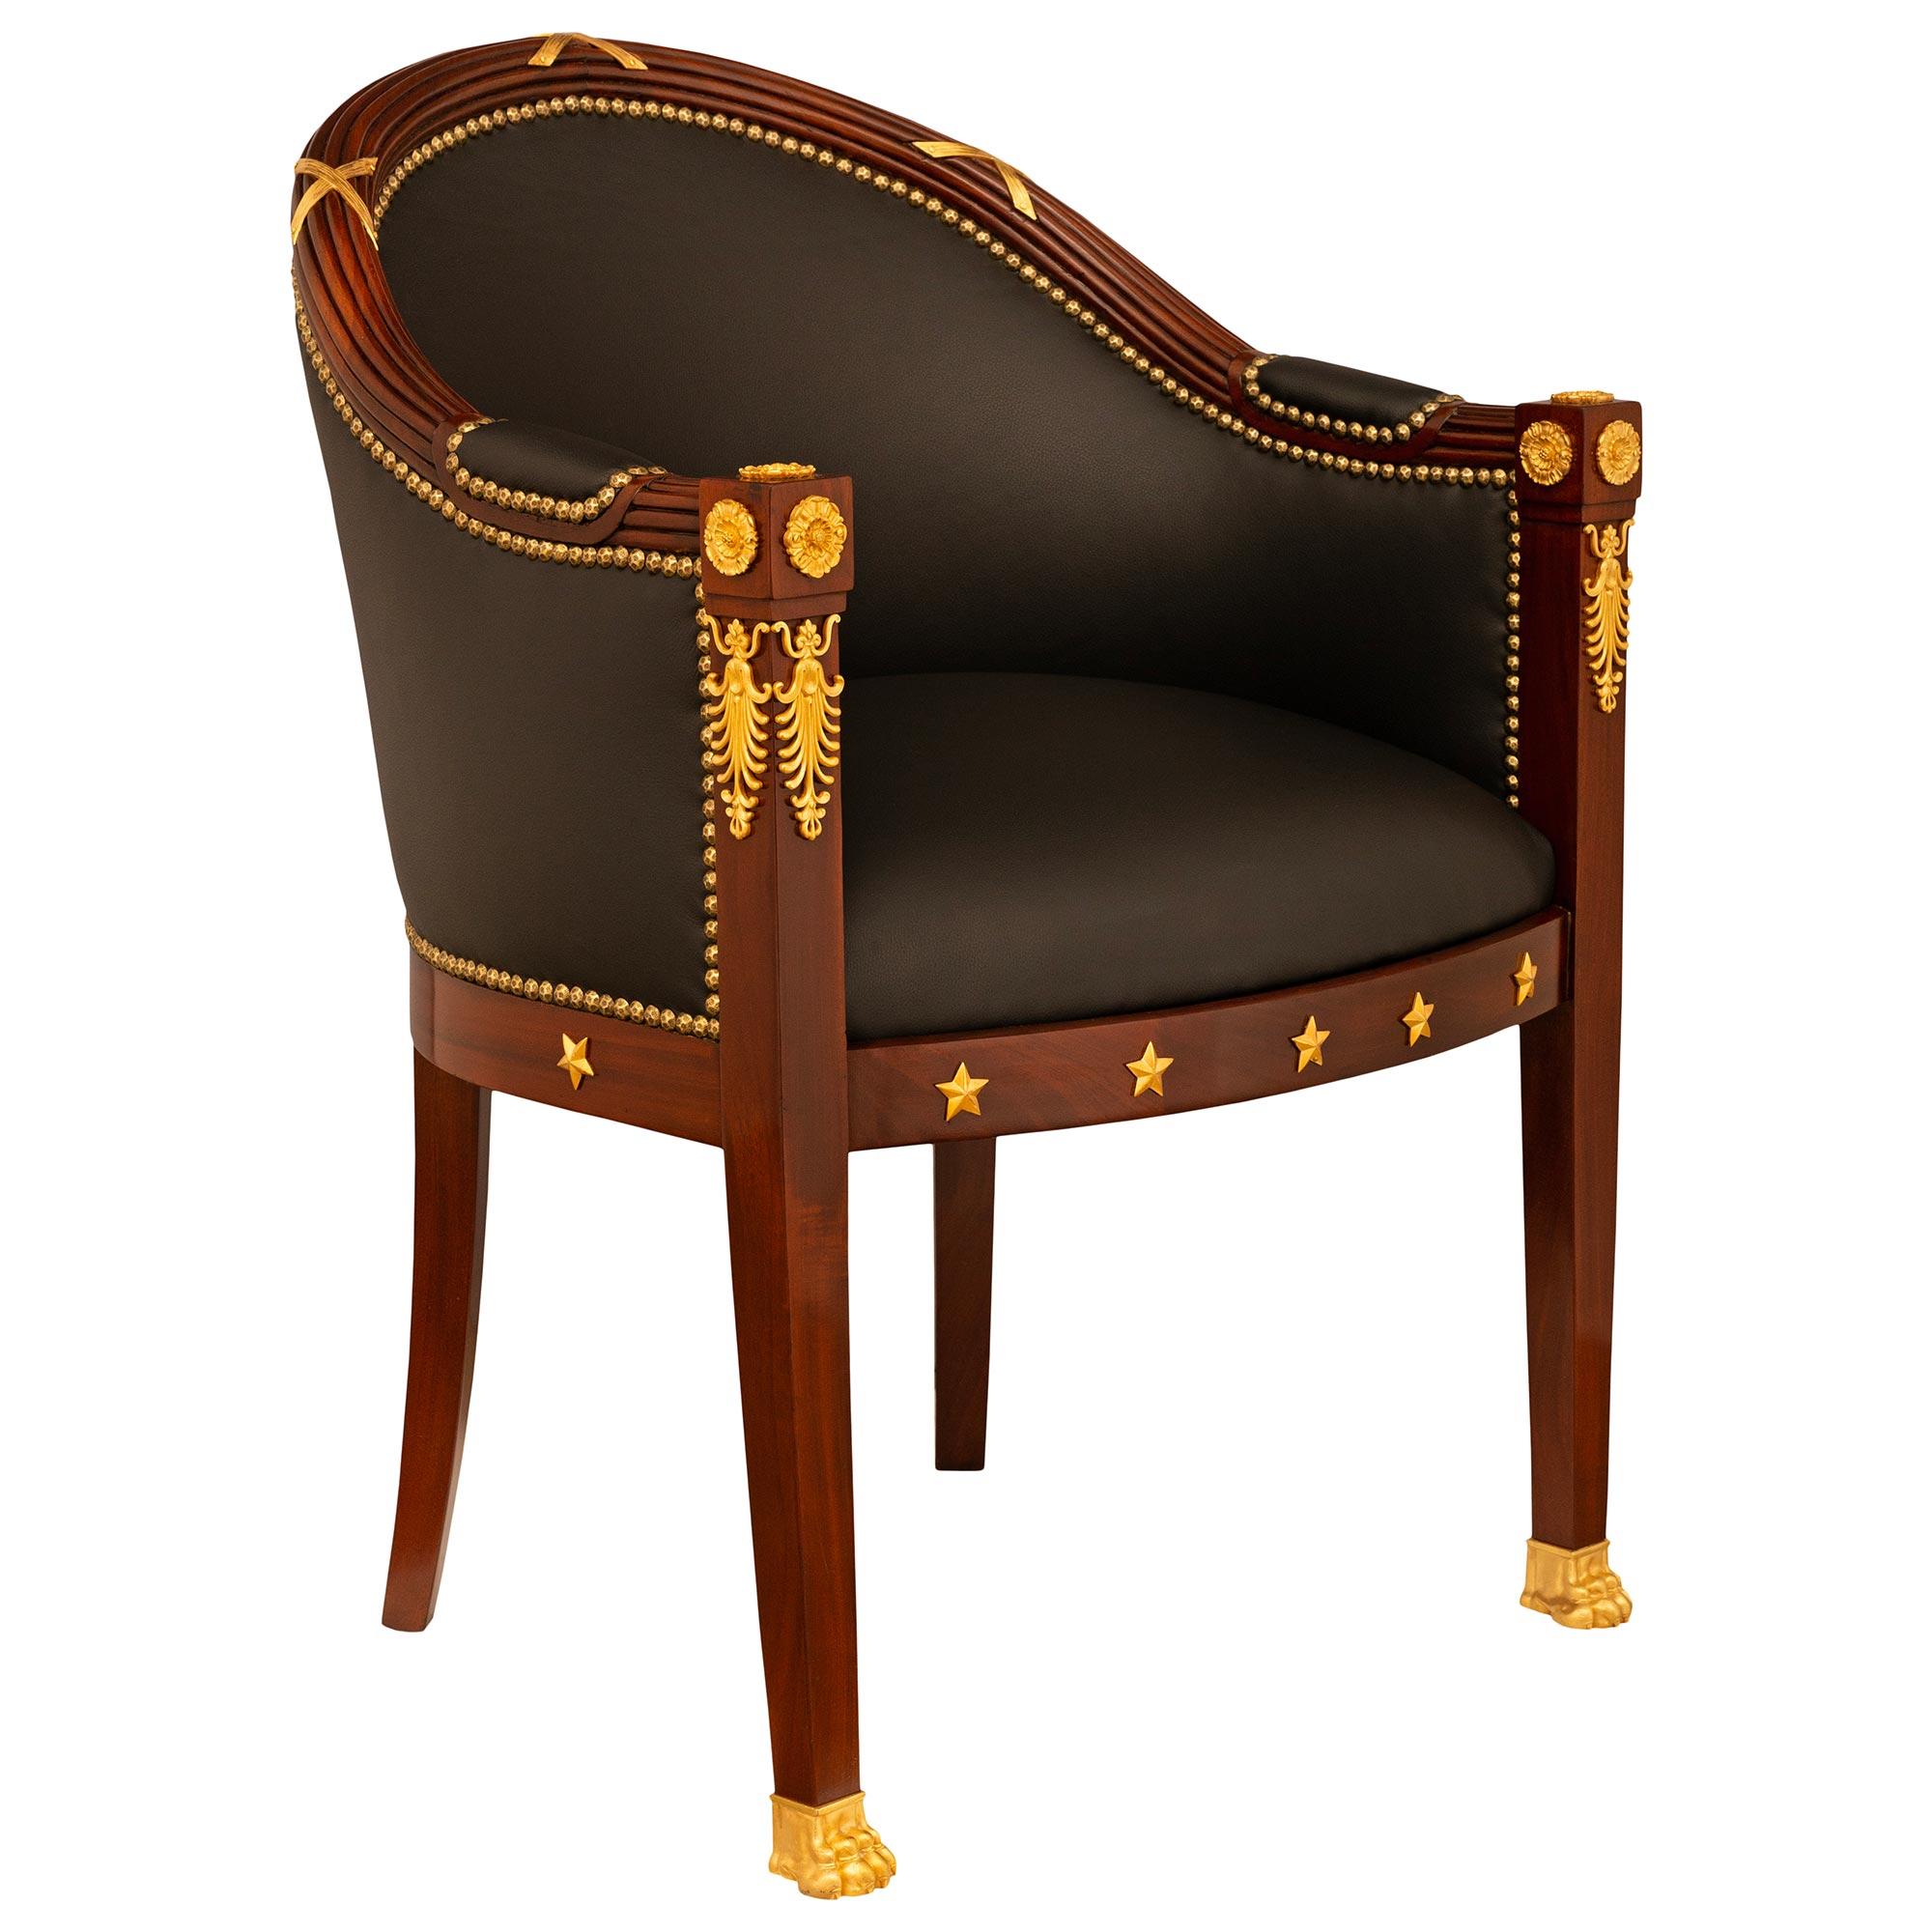 A handsome and finely detailed French 19th century Empire st. Mahogany and Ormolu armchair. The armchair is raised by four square and gently curved legs with Ormolu pawed feet on the front legs. The straight front apron has five Ormolu stars with